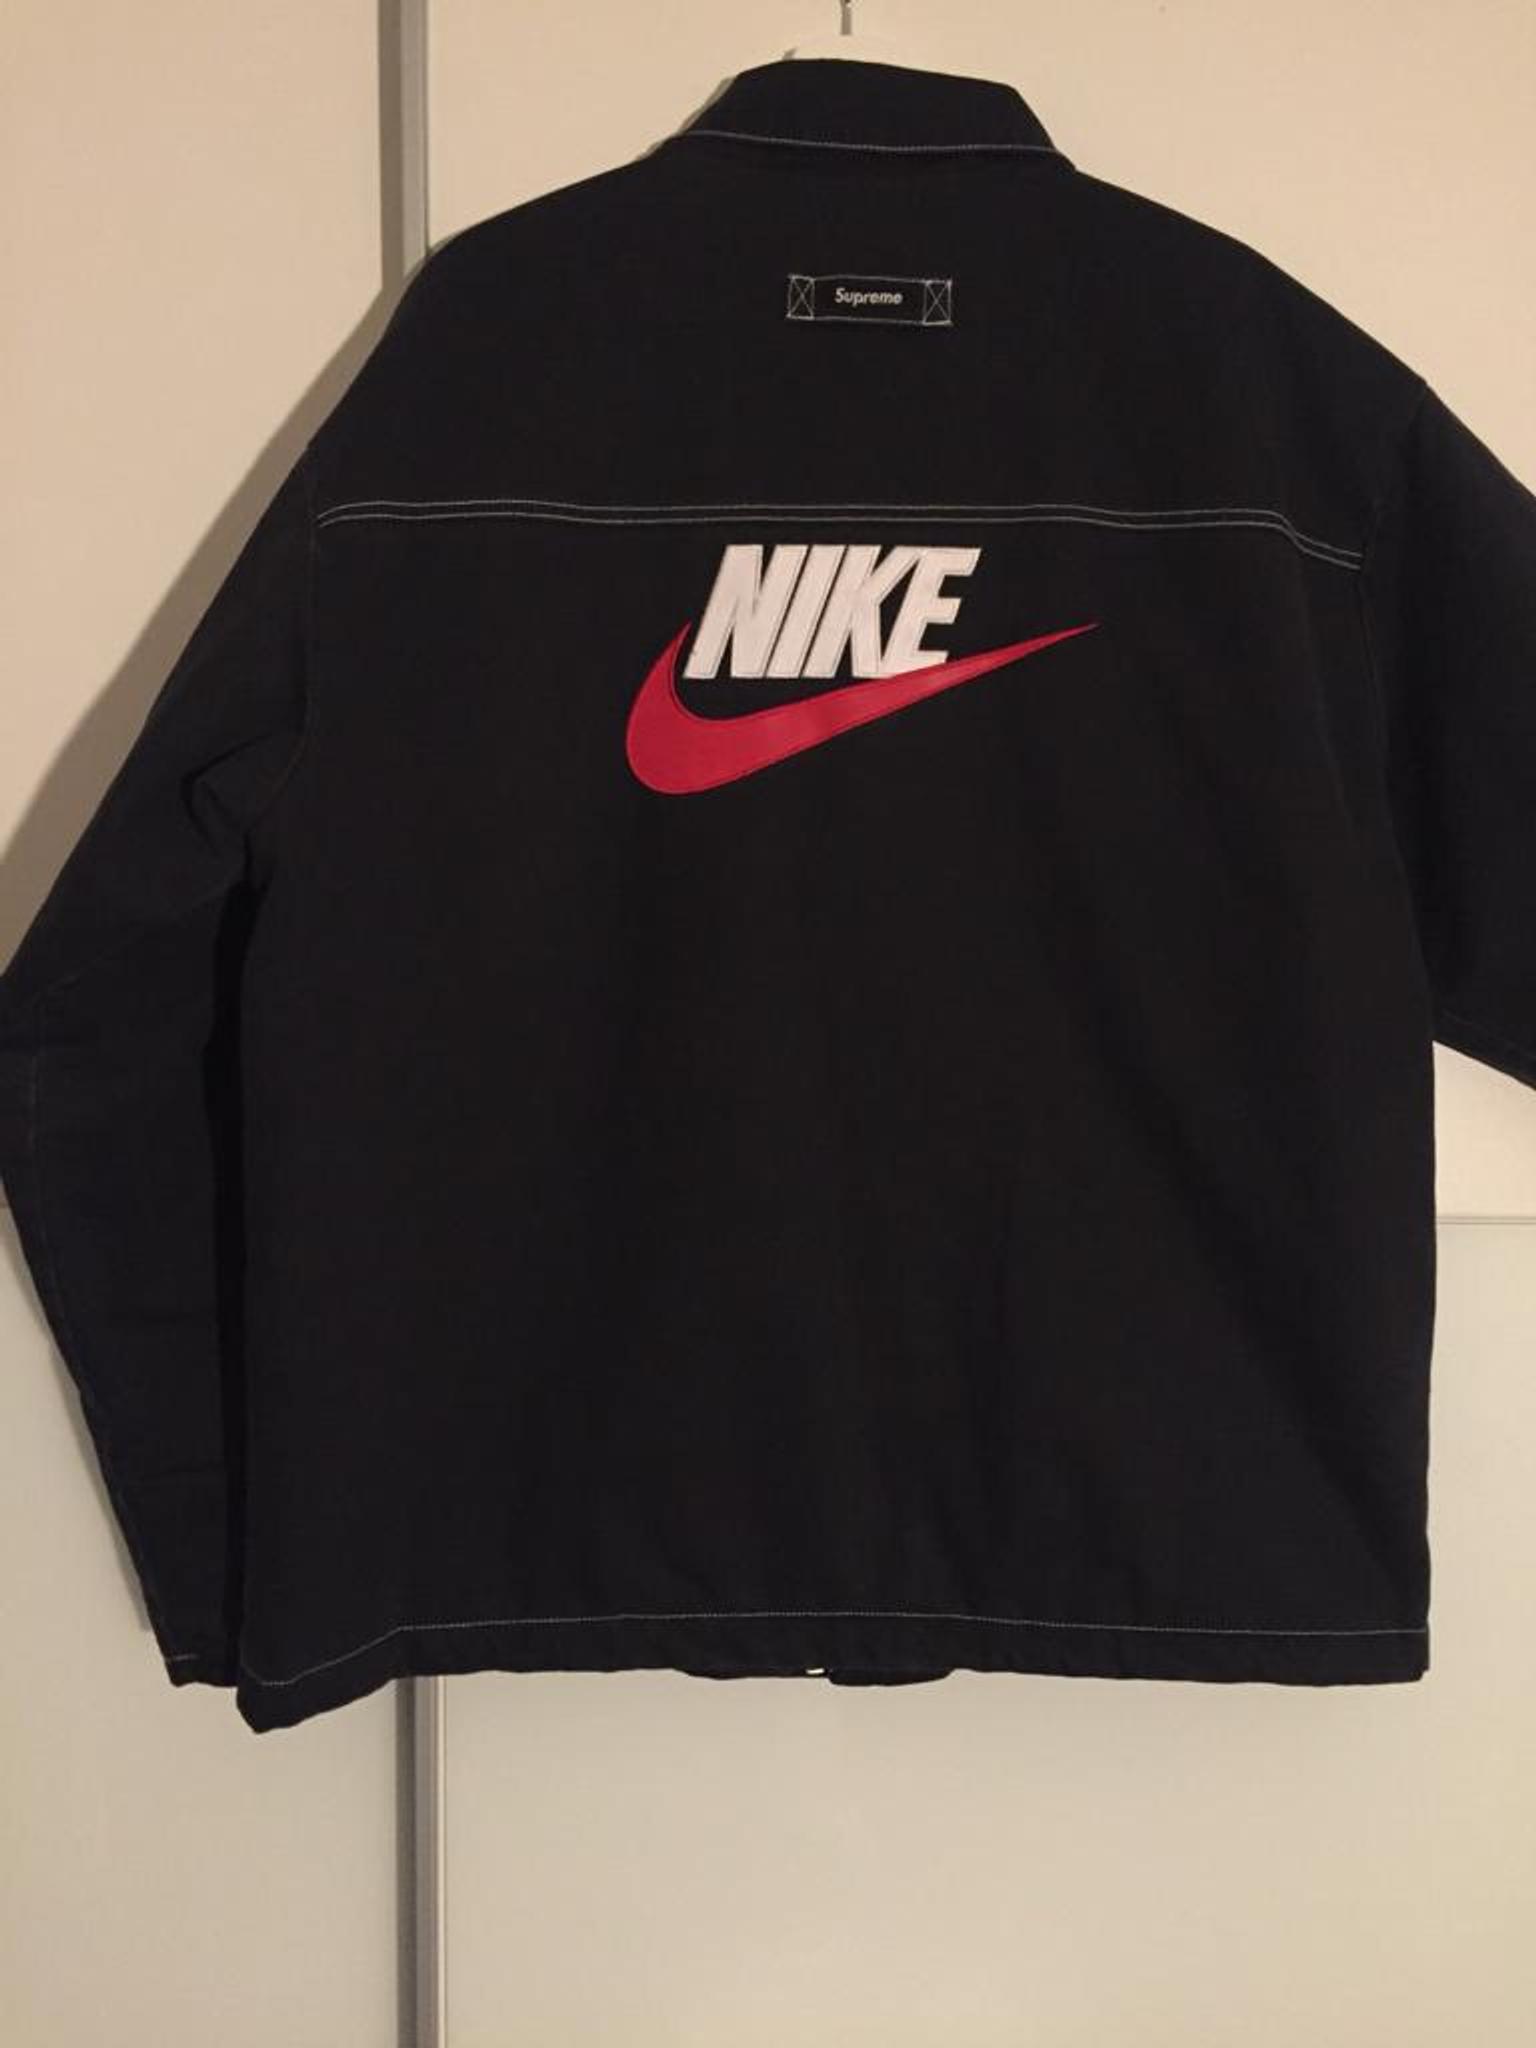 Supreme X Nike Double zip quilted work jacket in 50668 Köln for 